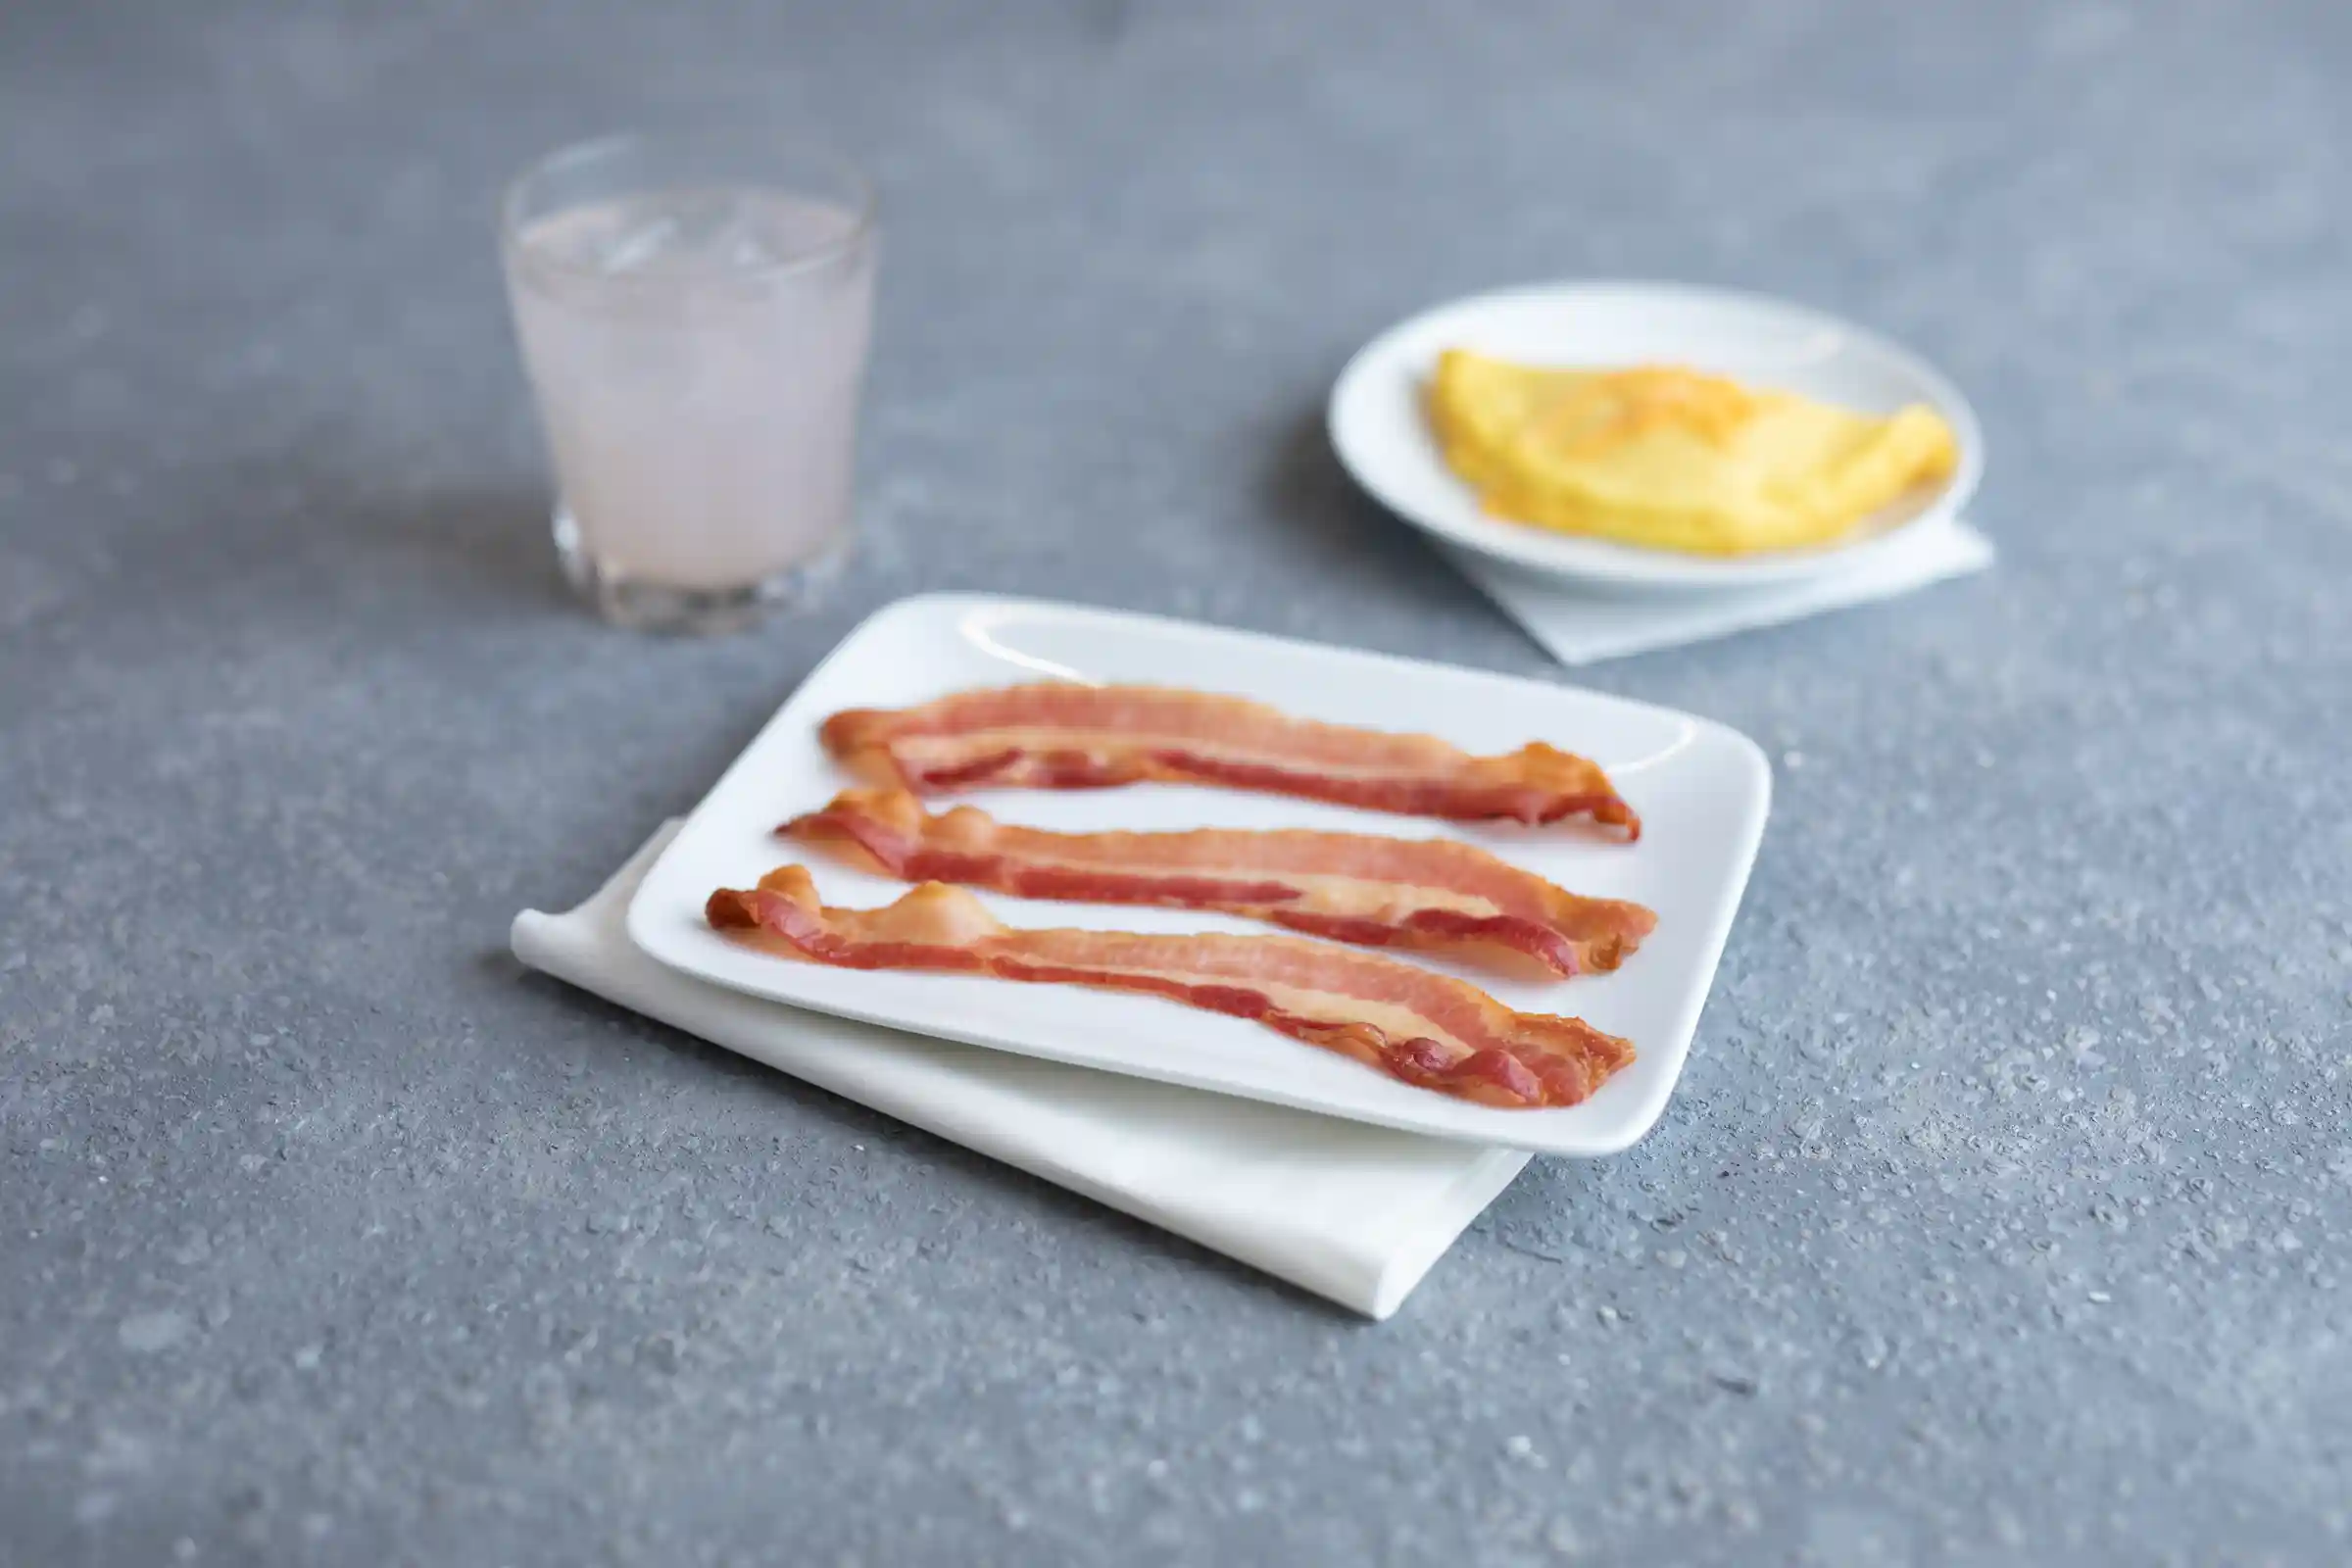 Wright® Brand Naturally Applewood Smoked Thin Sliced Bacon, Flat-Pack®, 15 Lbs, 18-22 Slices per Pound, Gas Flushedhttps://images.salsify.com/image/upload/s--3qkgypFG--/q_25/xpo663i7oztjtkwuumox.webp